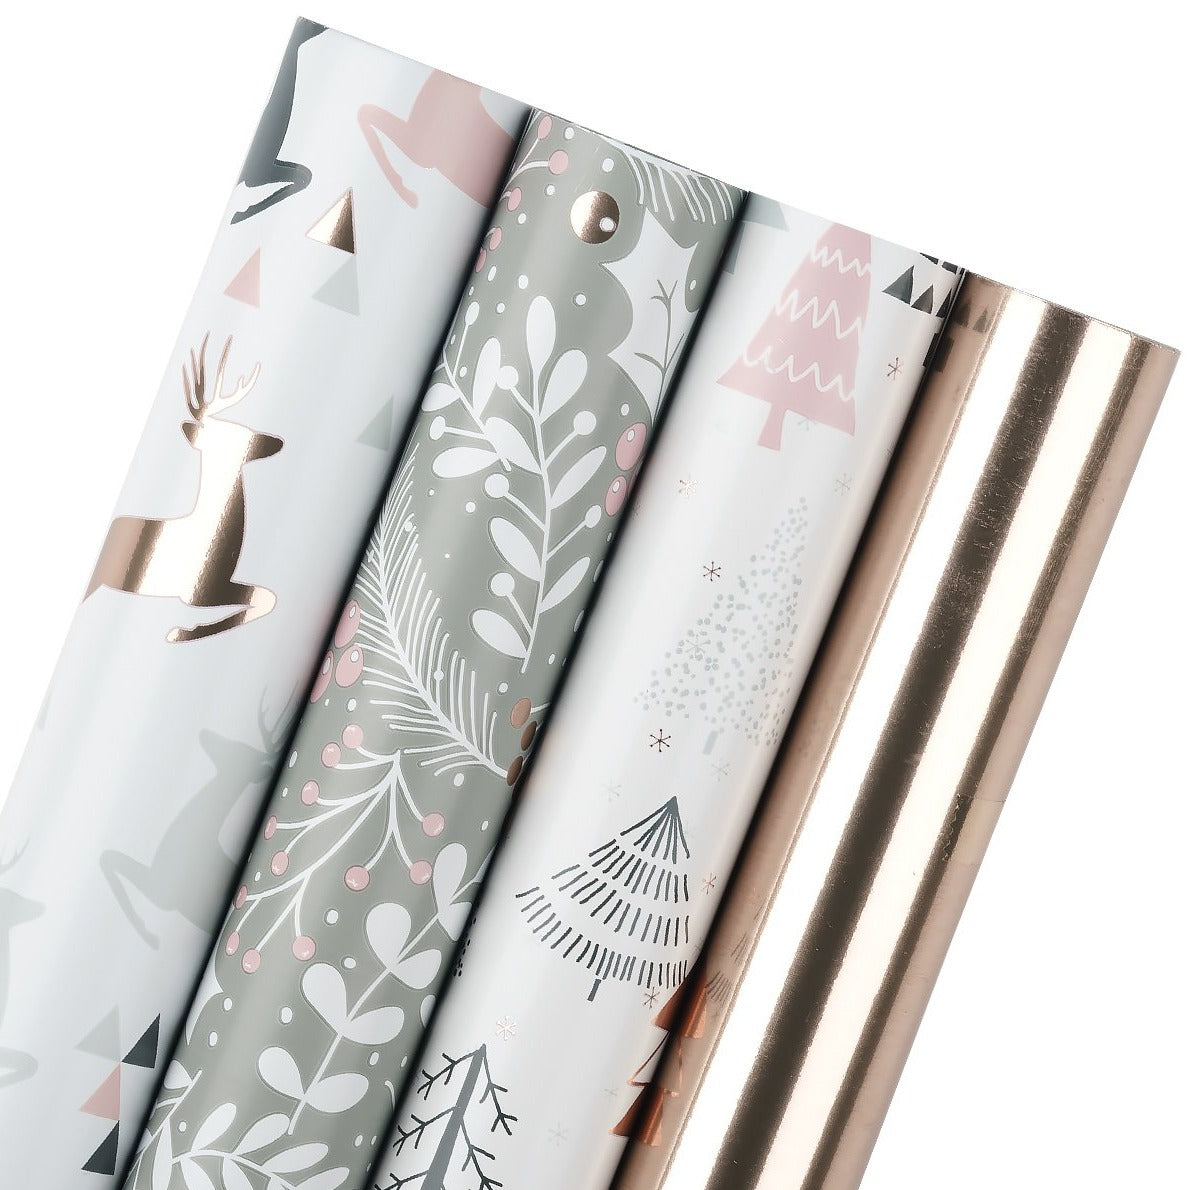 Metallic Brush Wrapping Paper Roll, Silver 16.5' – WrapaholicGifts